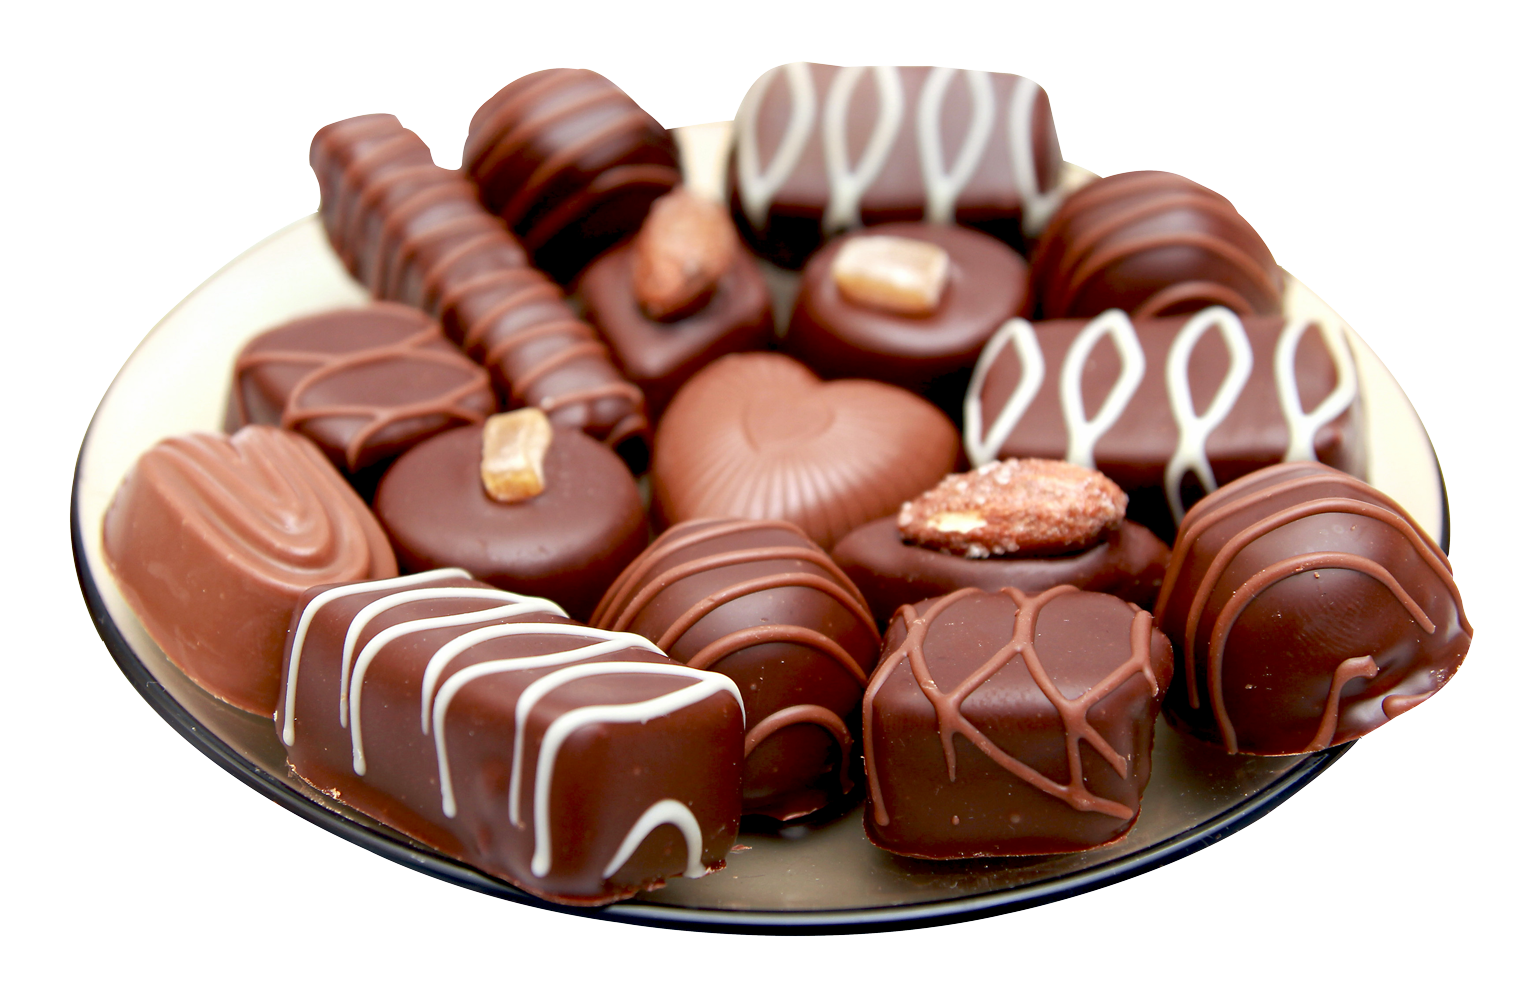 Chocolates in Plate